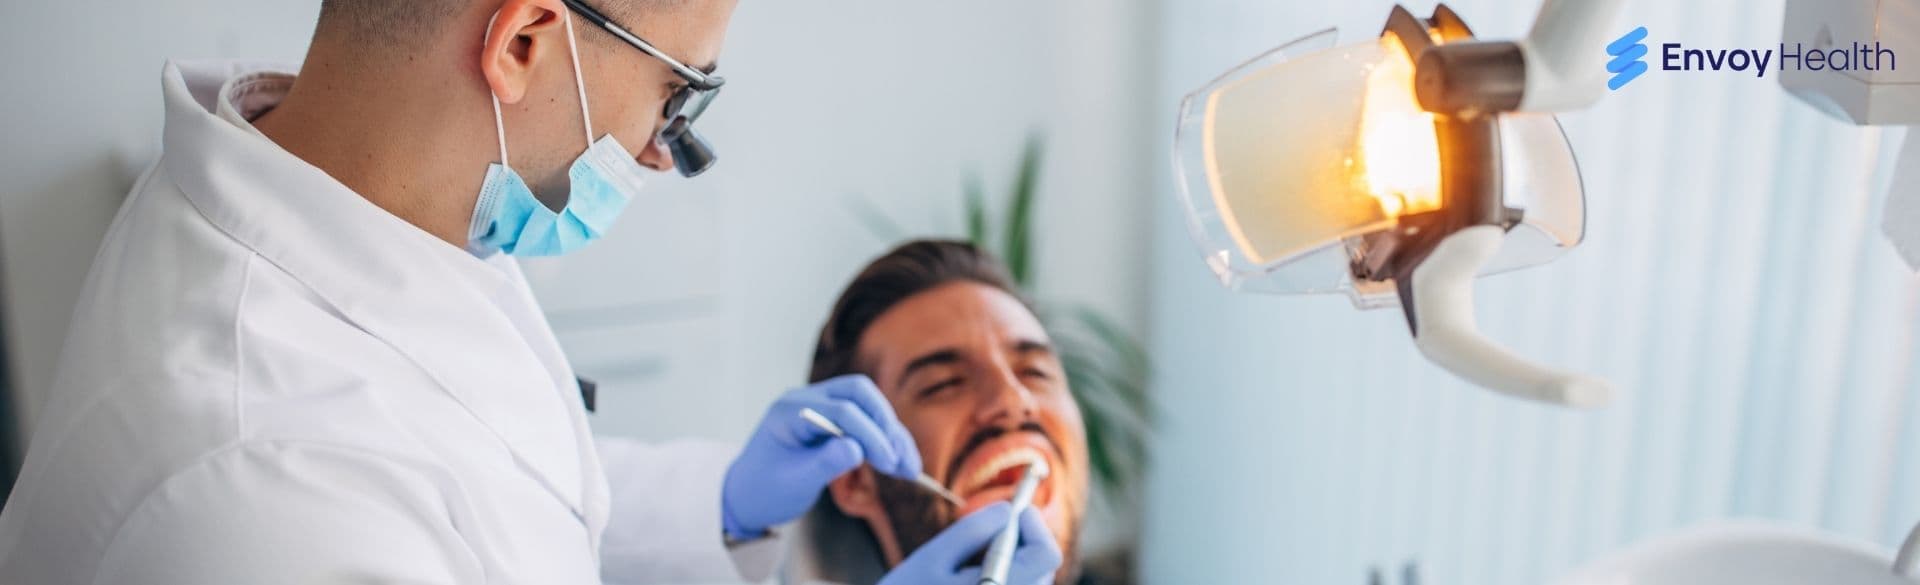 Are Cheap Dental Implants In Mexico Really Safe?